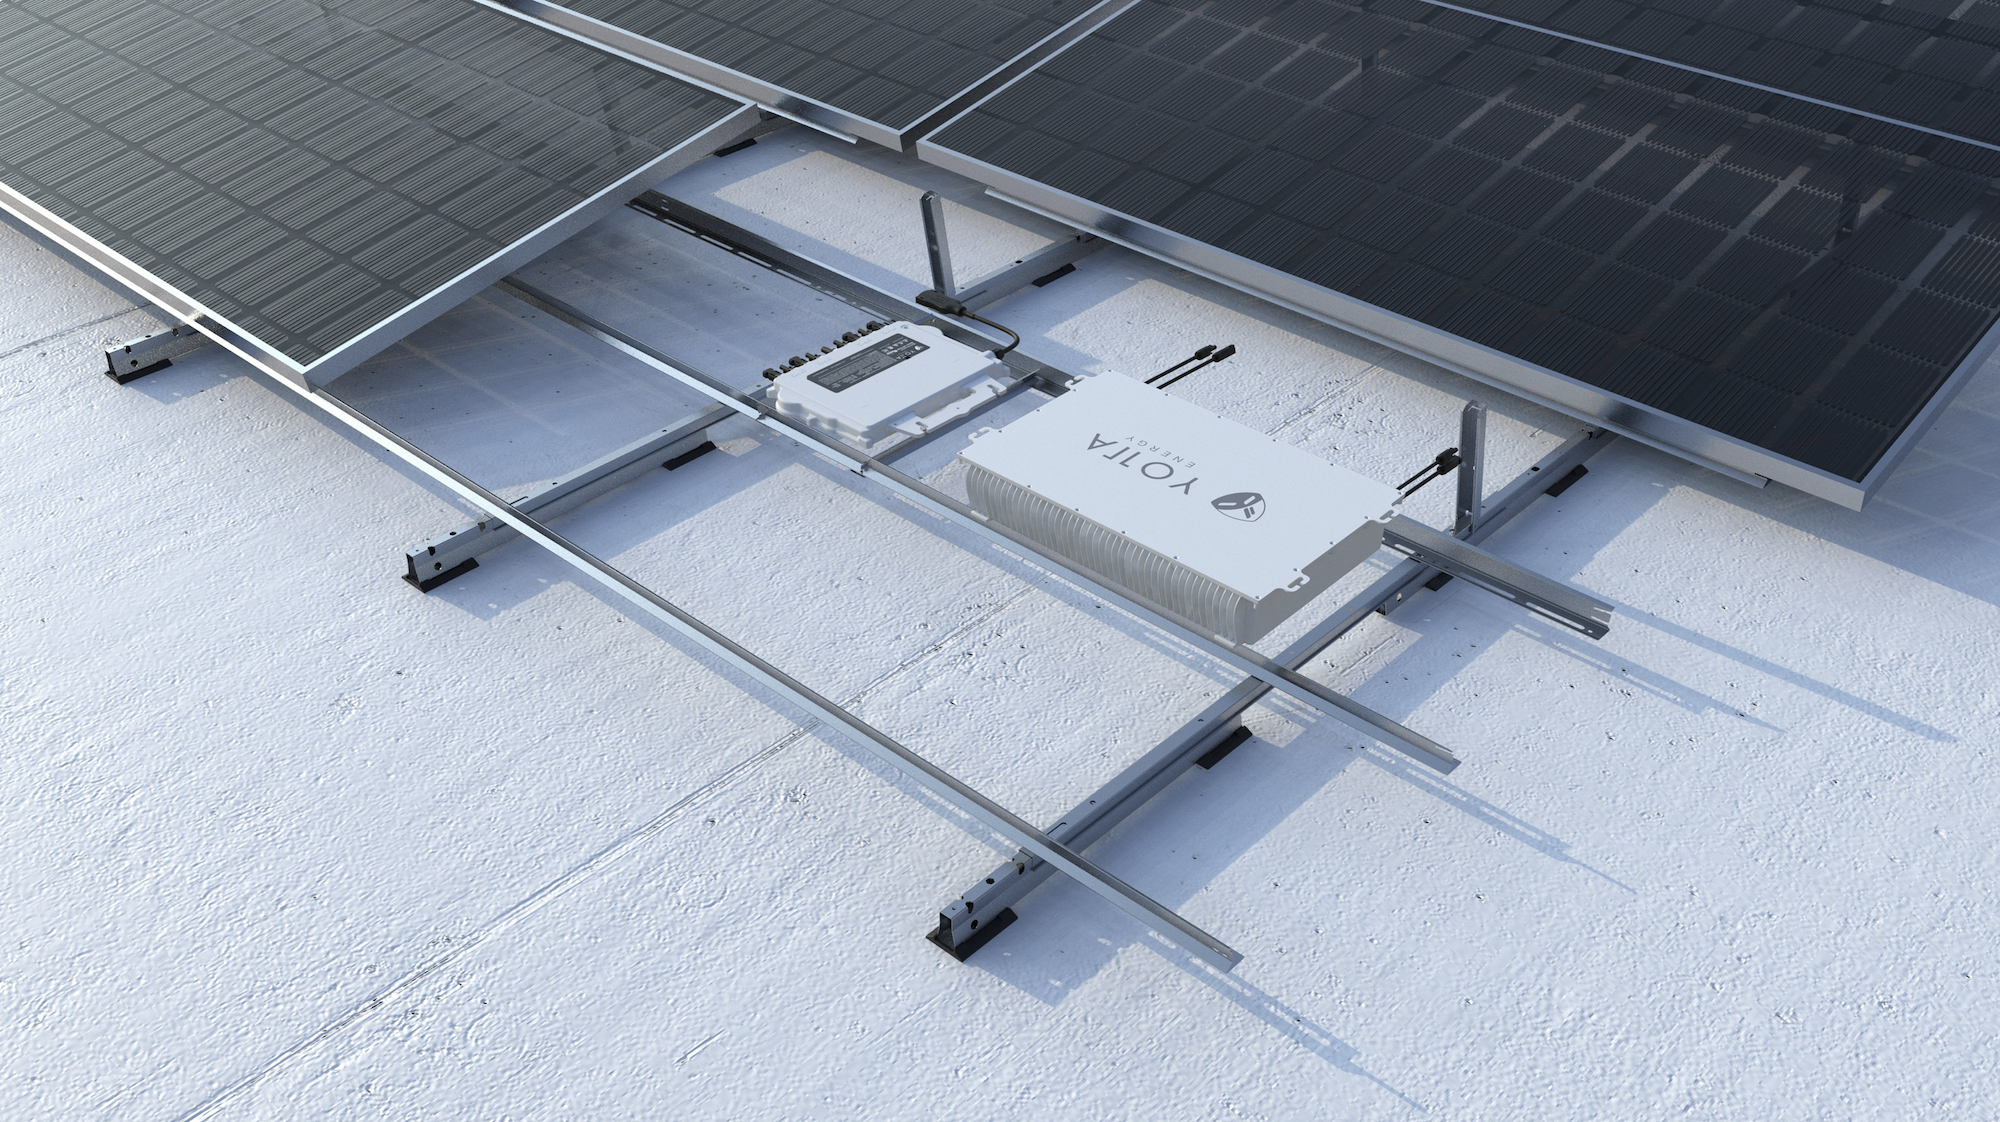 The Green Proving Ground program will evaluate an energy storage technology from Yotta Energy that is the size of a large laptop and installed in place of ballast beneath a rooftop photovoltaic system.